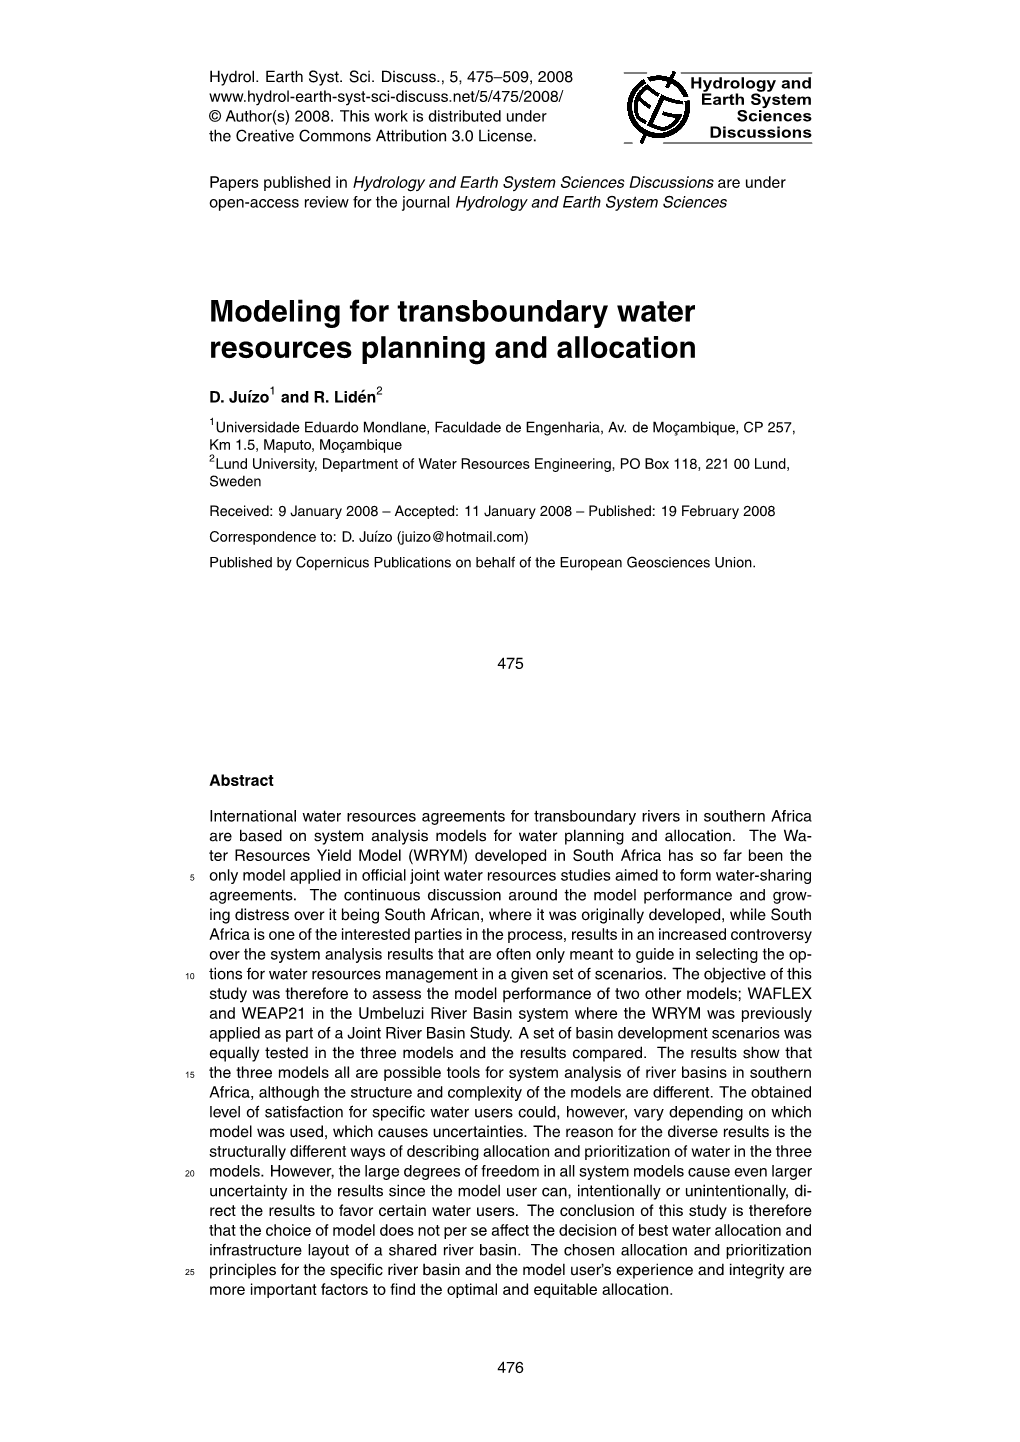 Modeling for Transboundary Water Resources Planning and Allocation